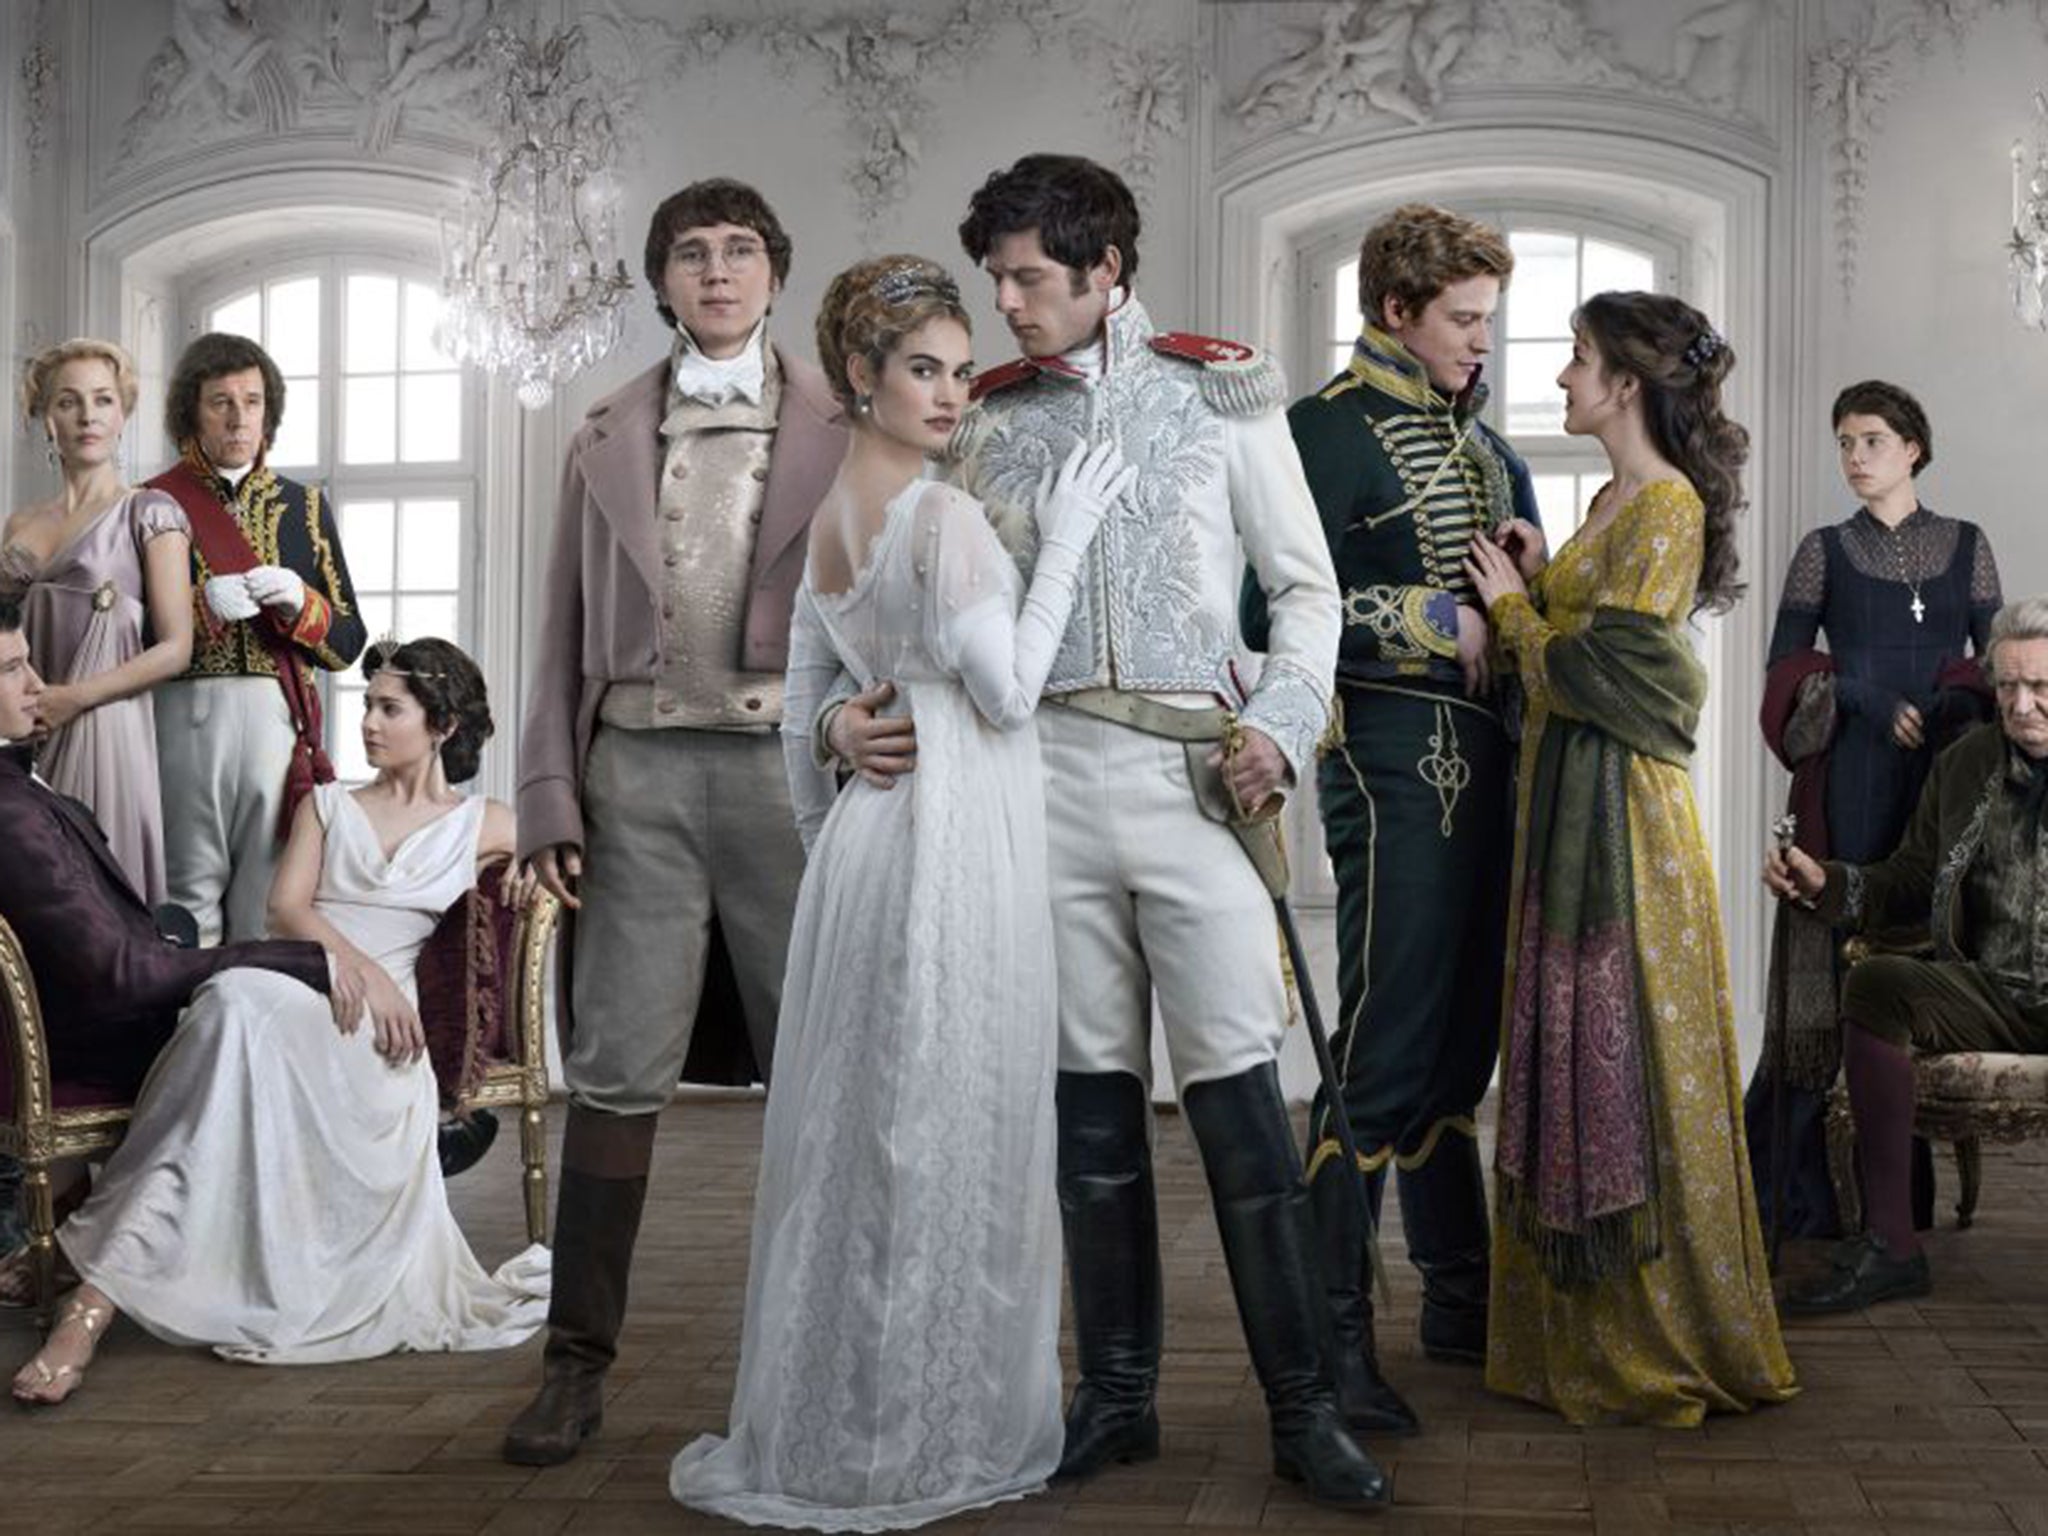 BBC One's War and Peace adaptation has aired its final episode